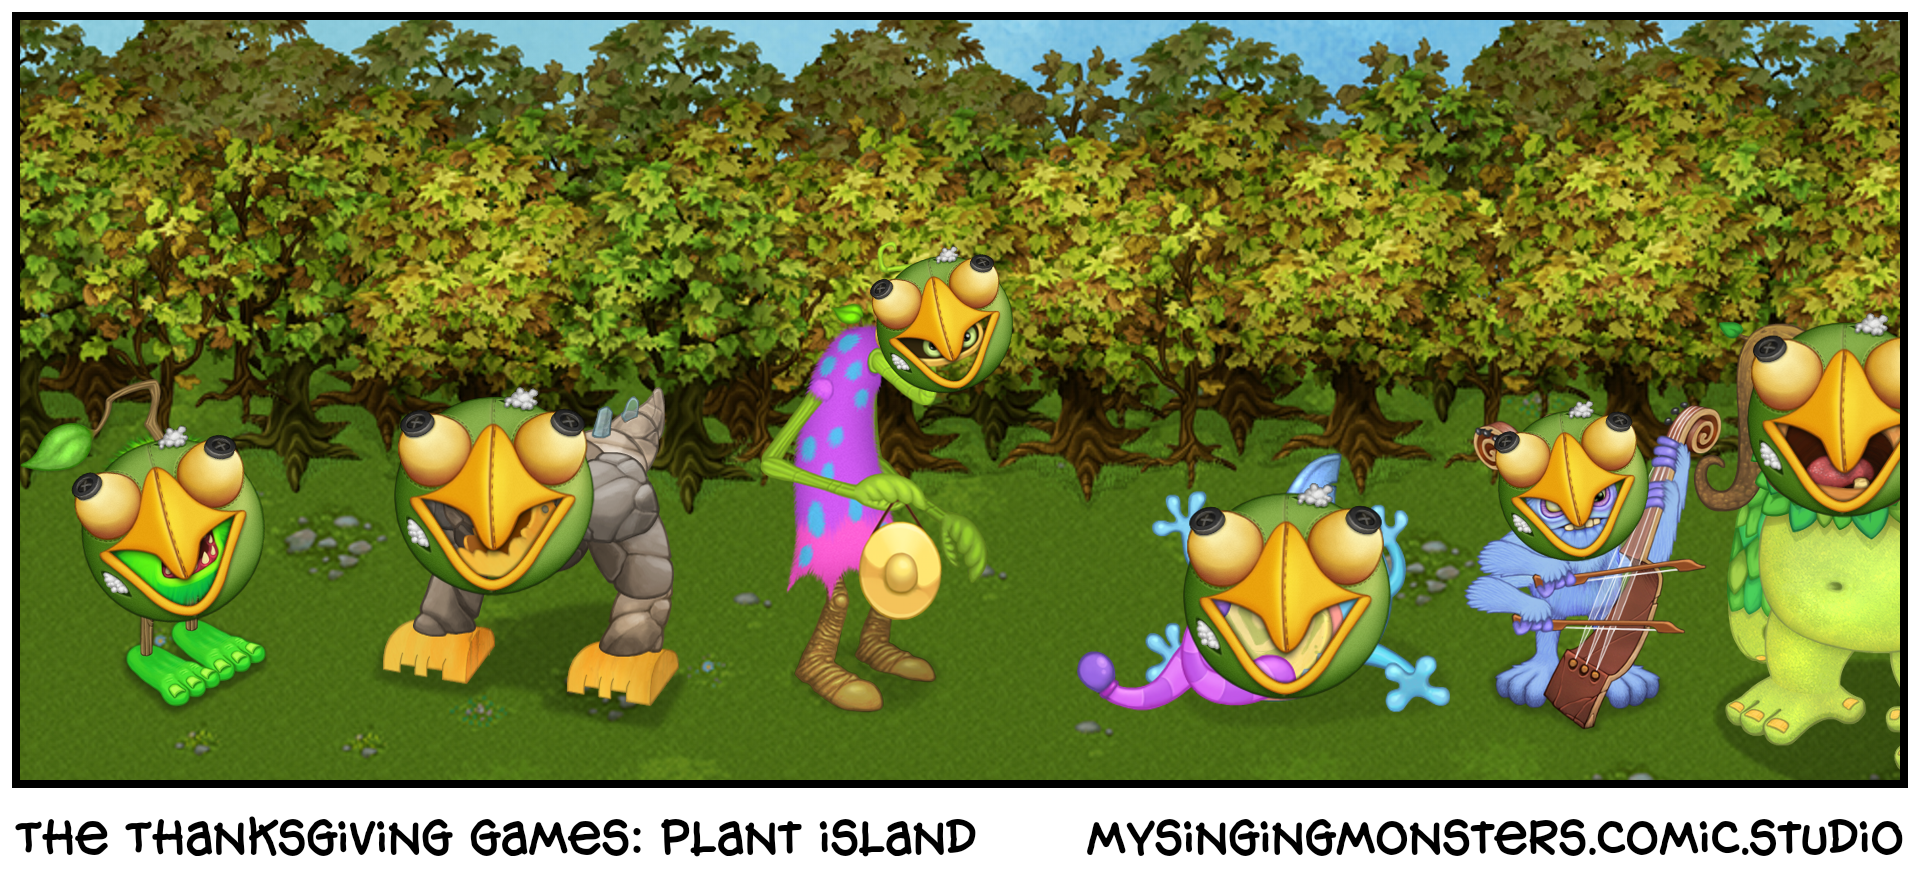 The Thanksgiving games: Plant island